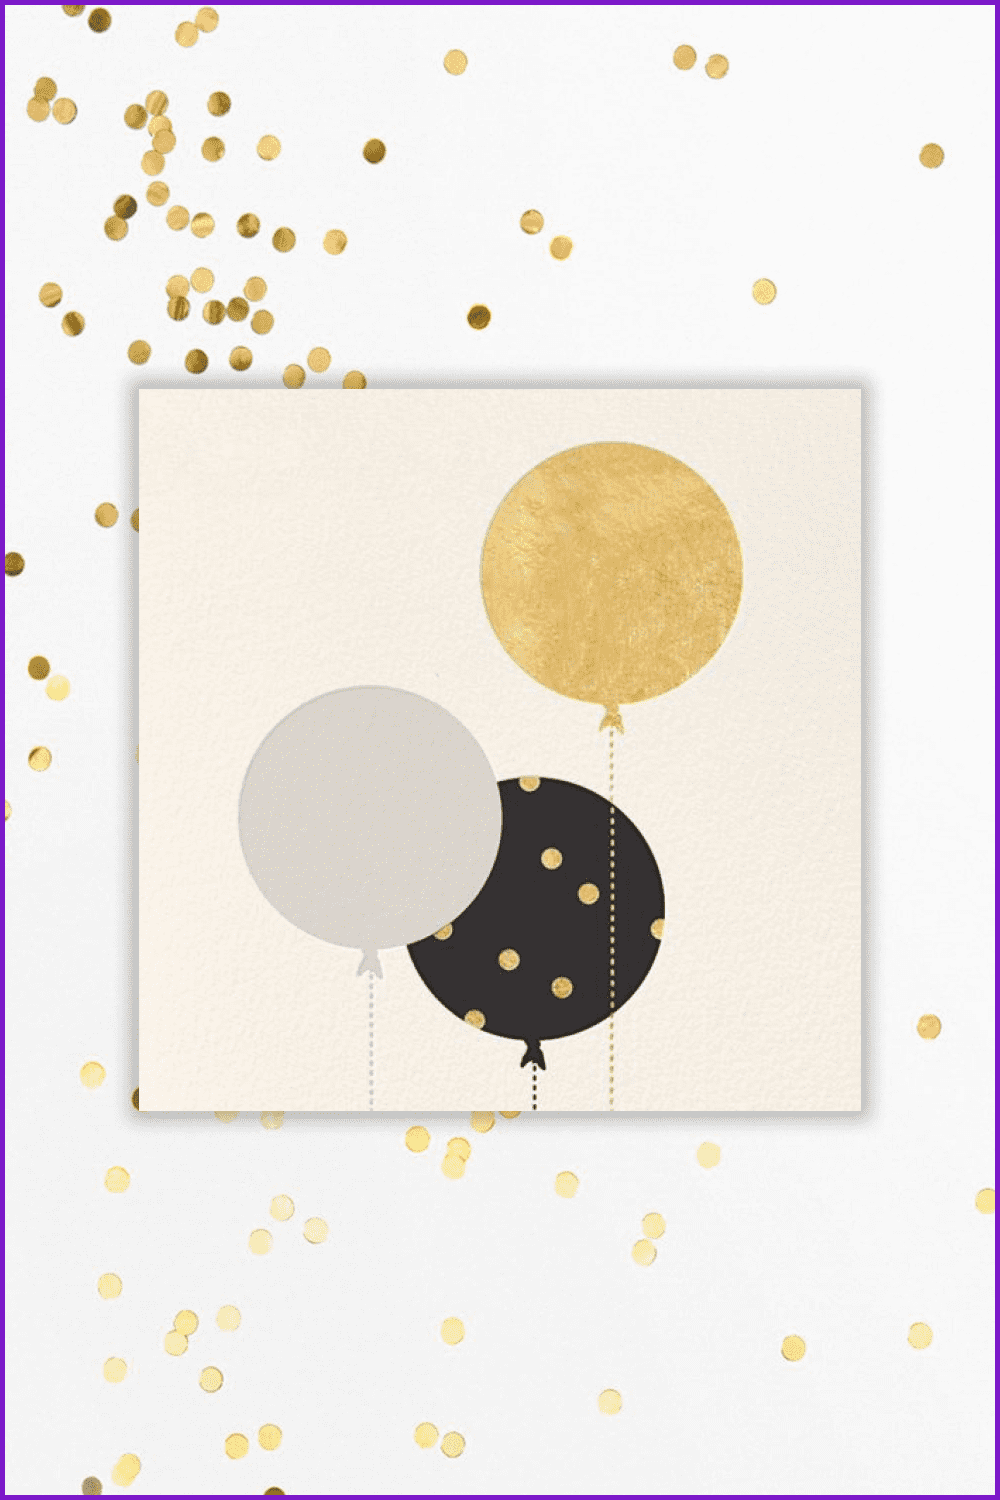 Beige card with three balloons.